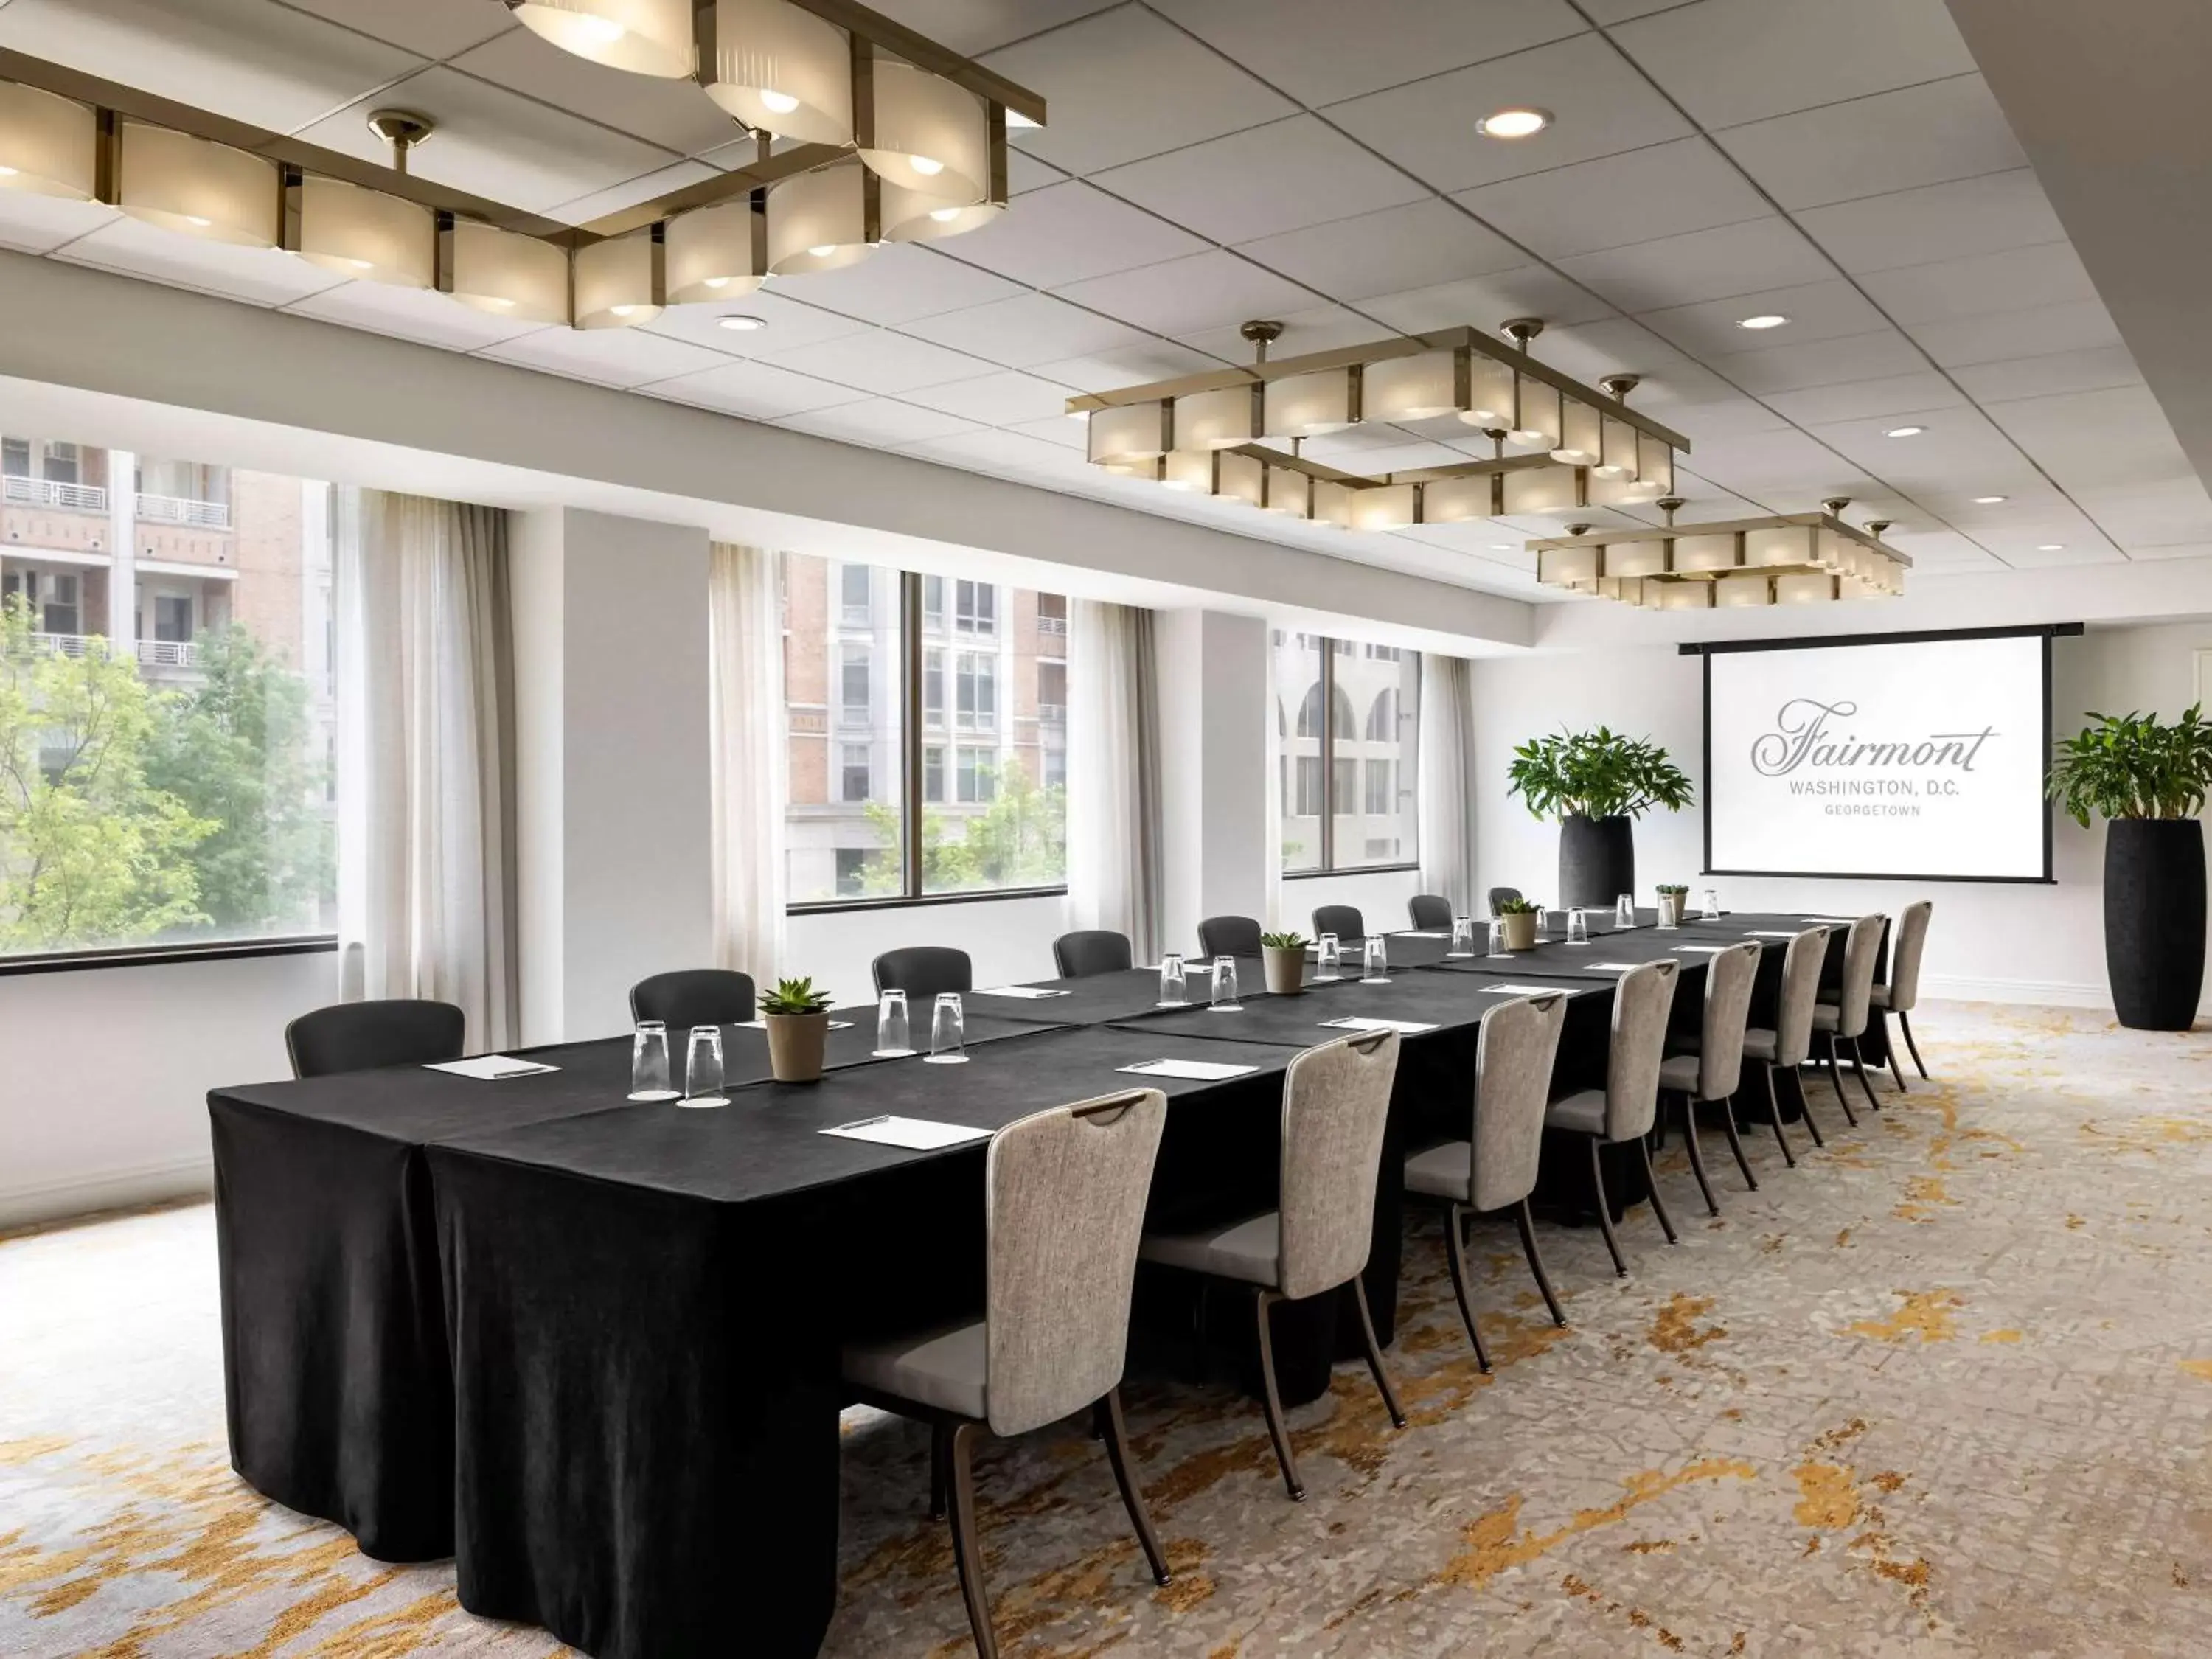 Meeting/conference room in The Fairmont Washington DC